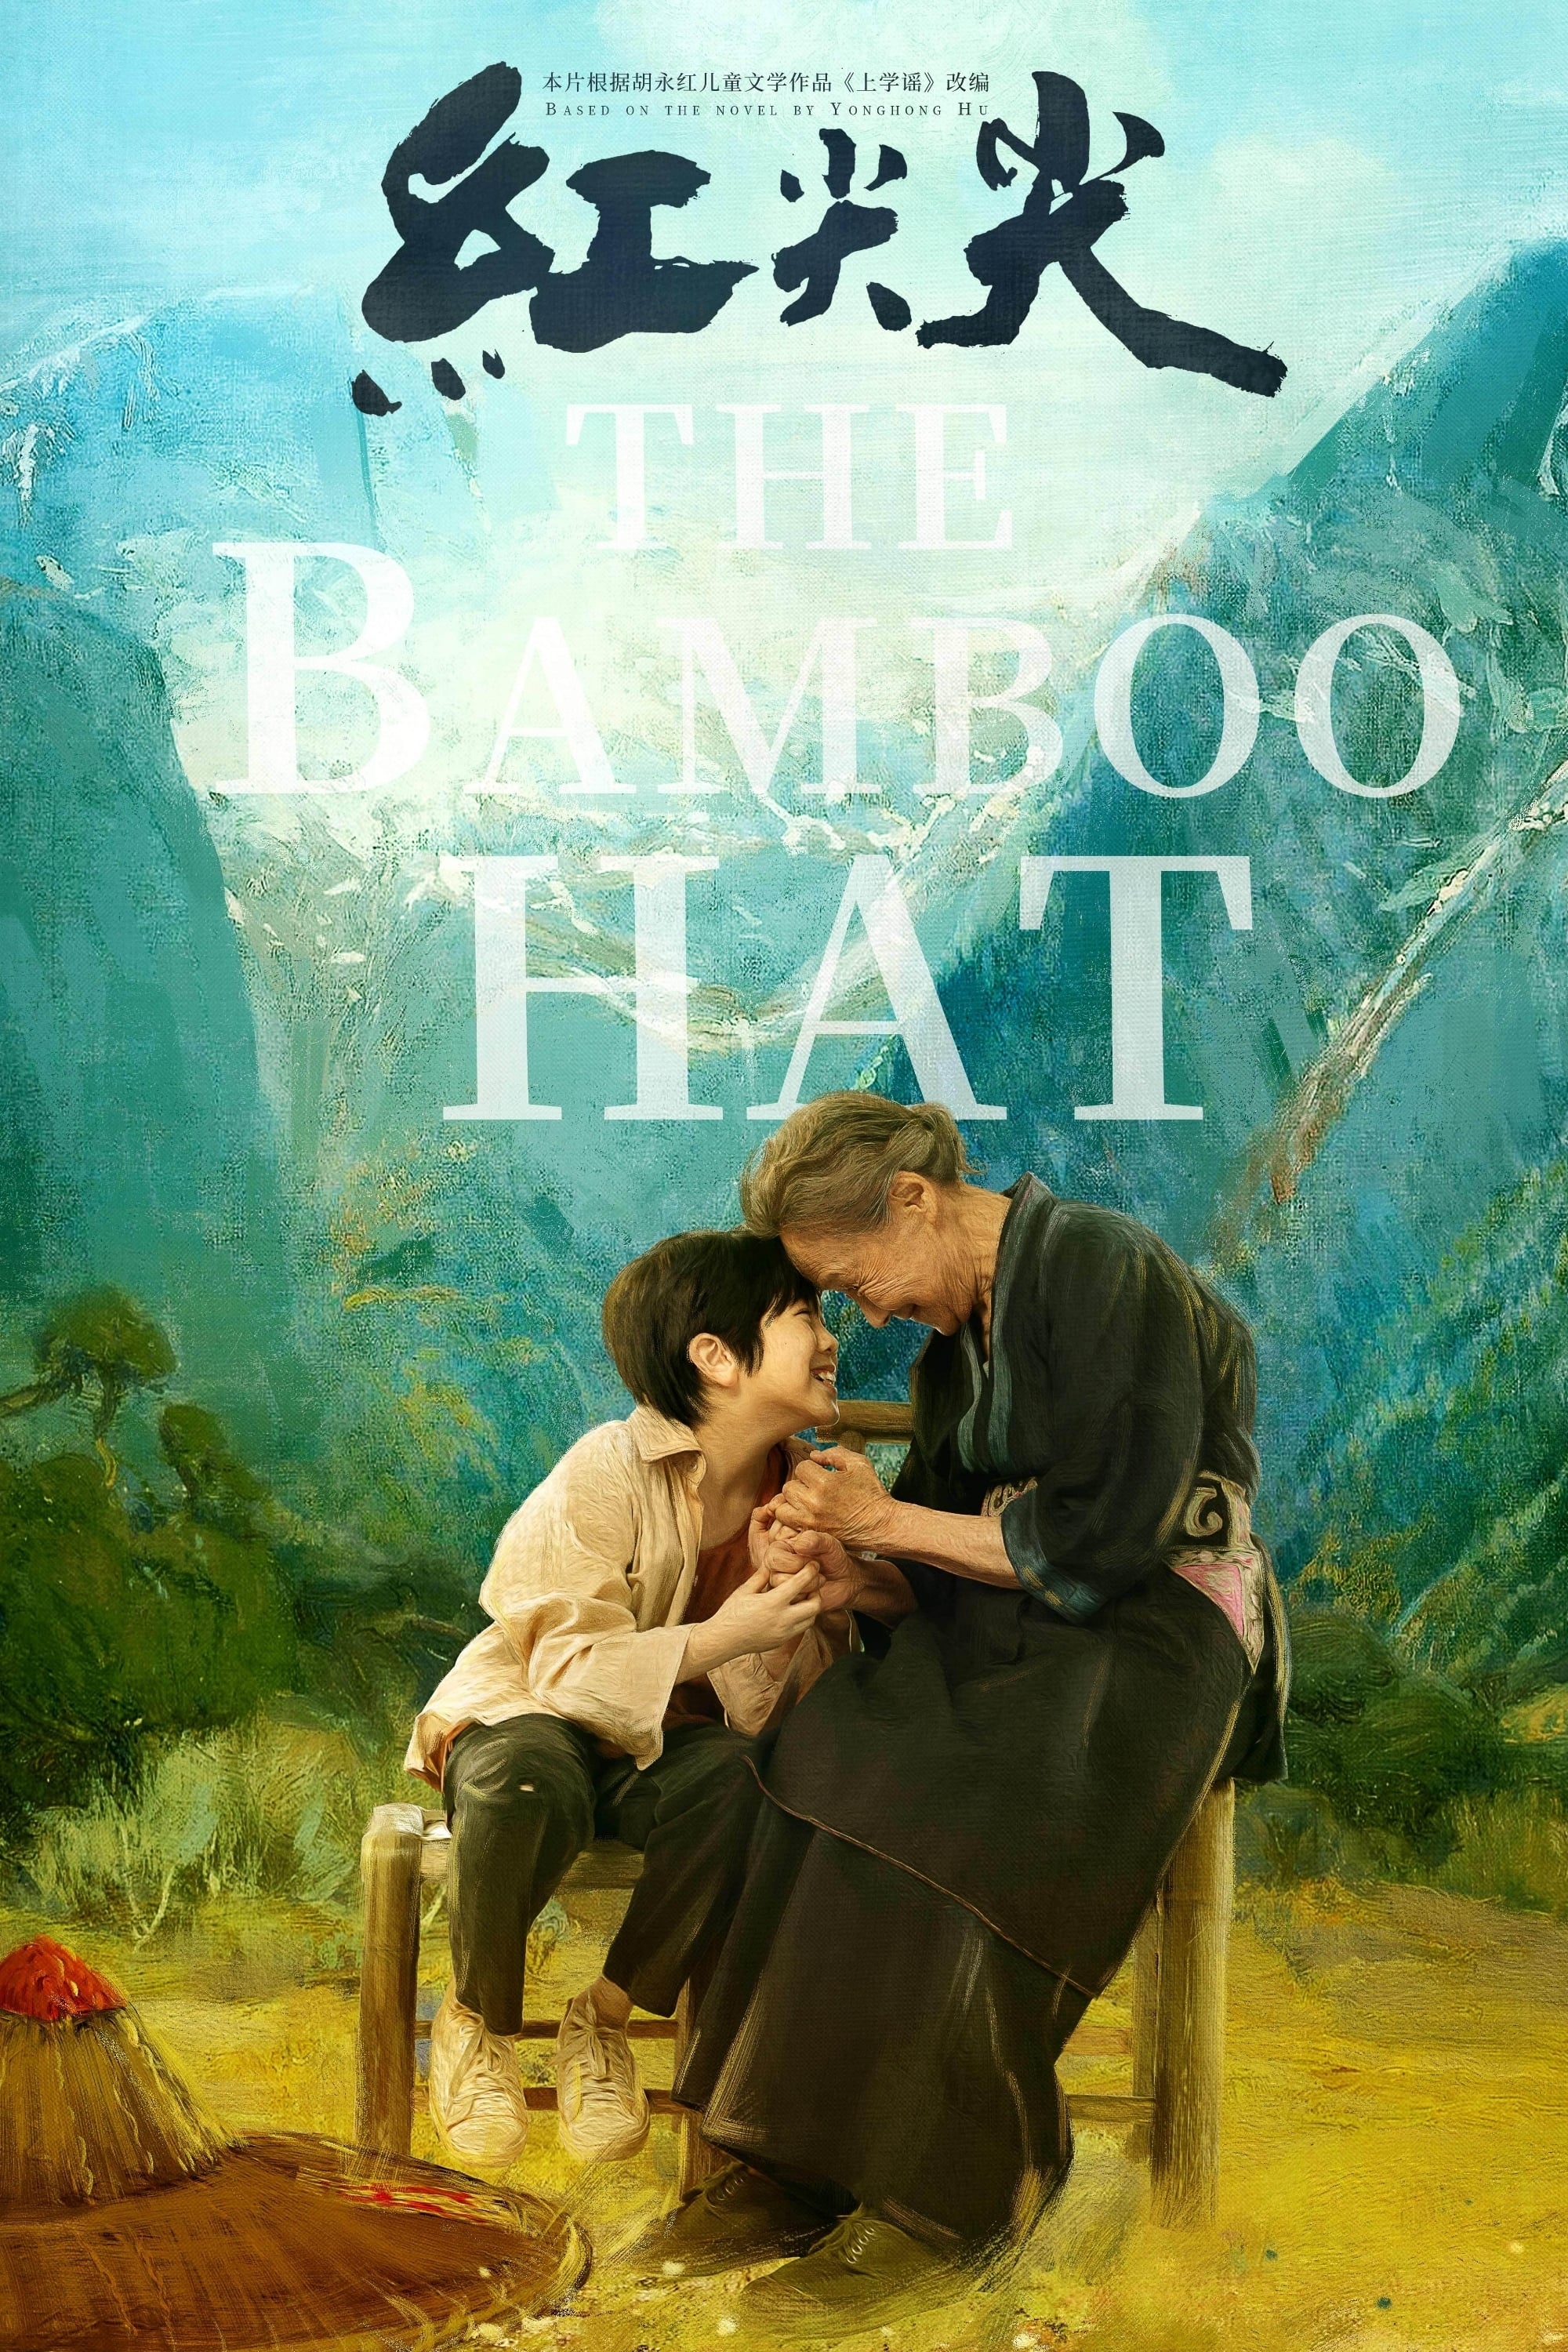 The Bamboo Hat